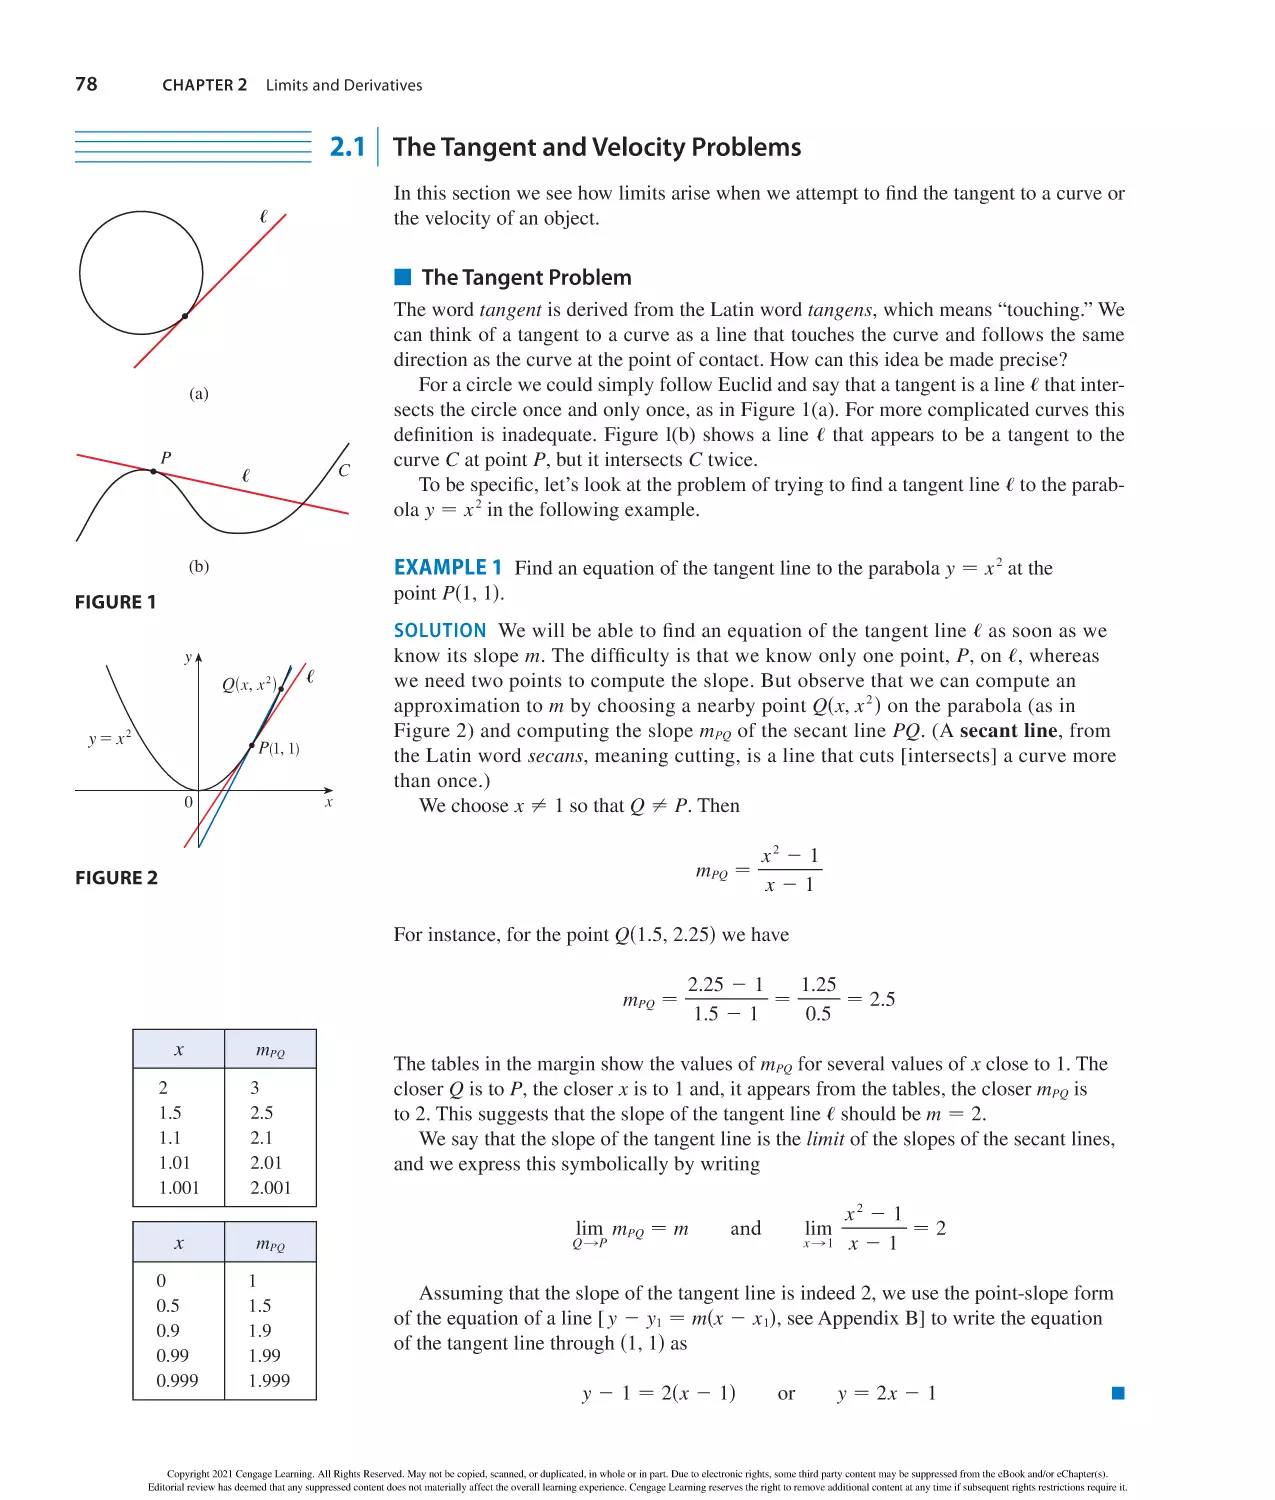 2.1 The Tangent and Velocity Problems